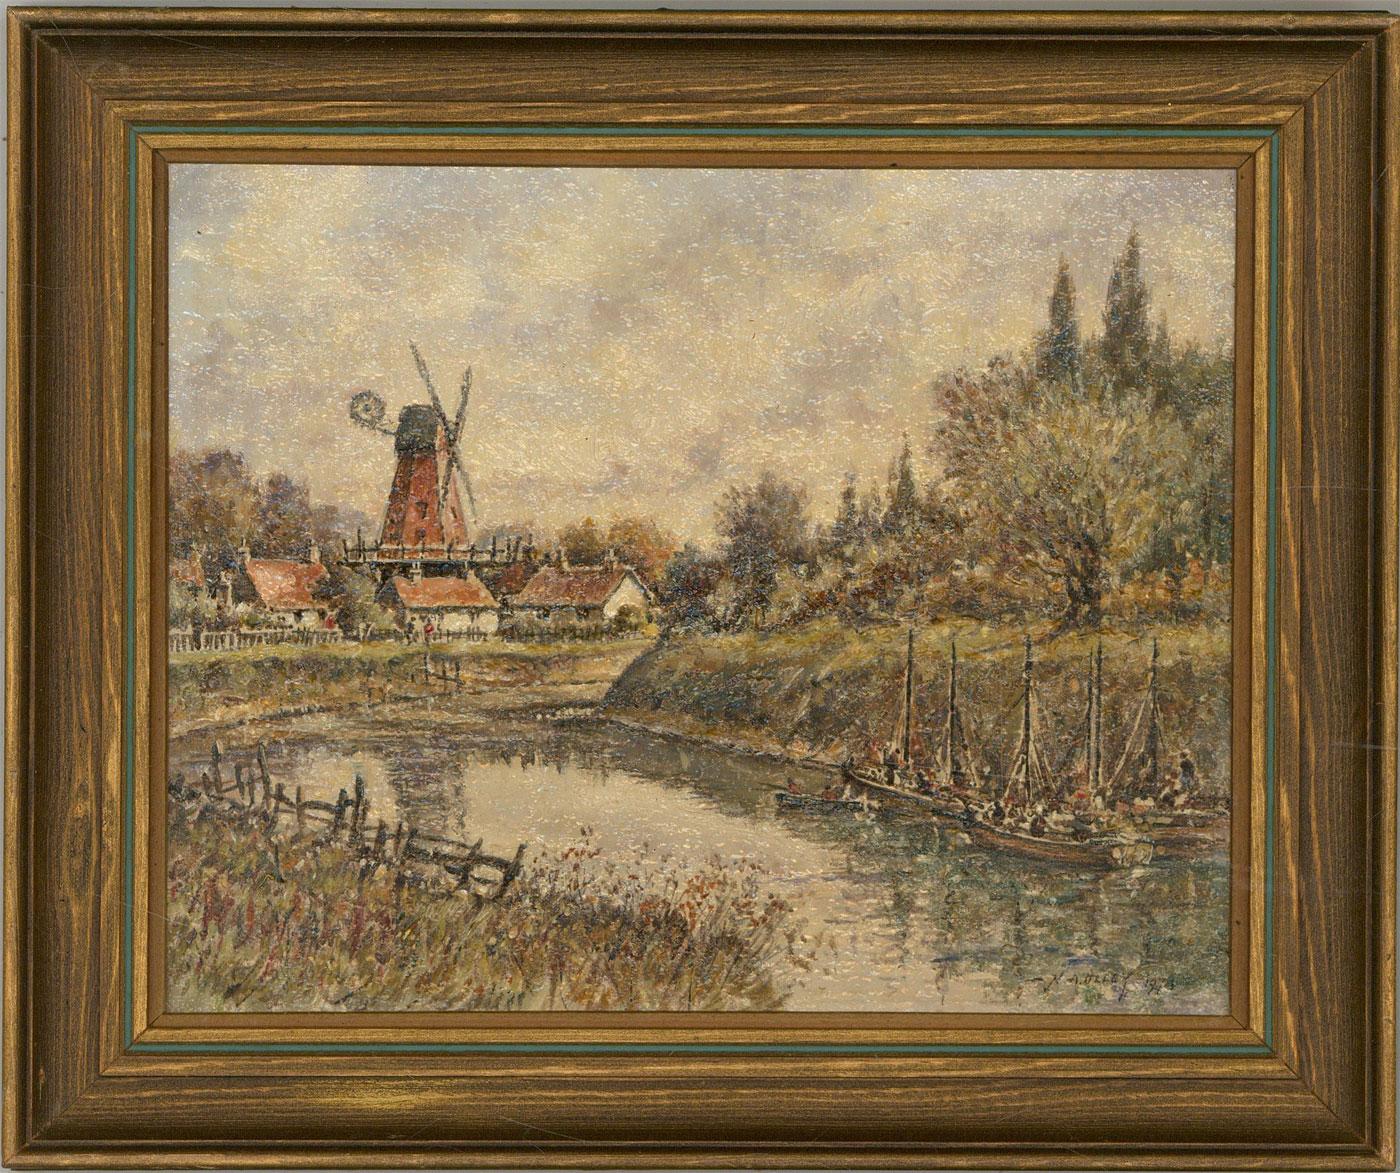 Unknown Landscape Painting - Norman Olley - Signed & Framed 1974 Oil, River Landscape with Windmill